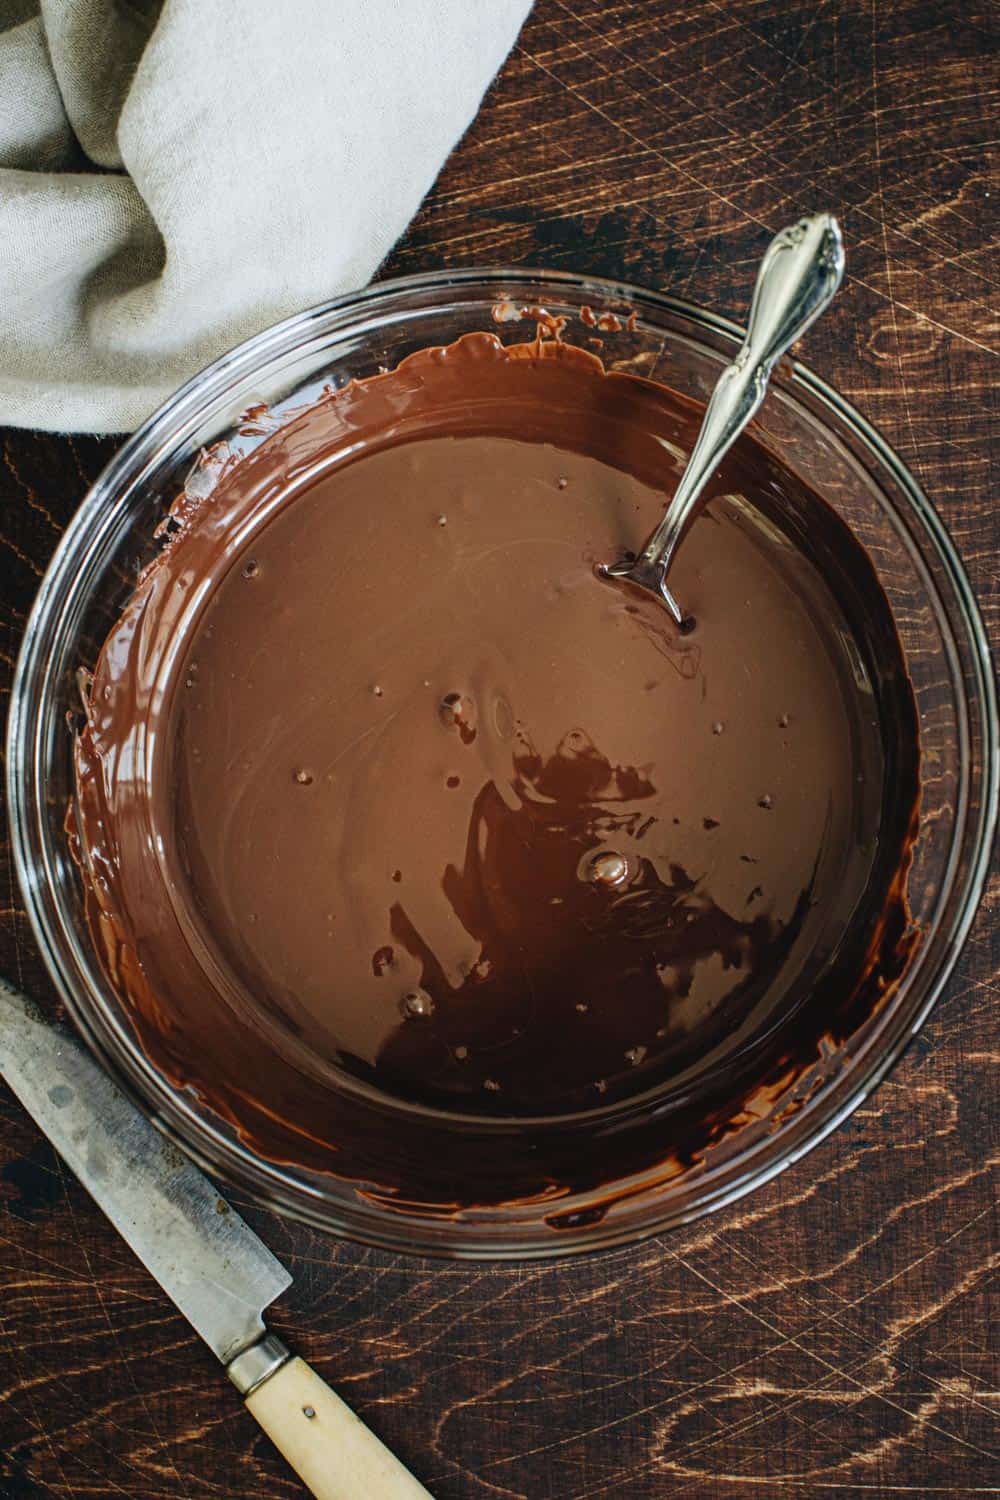 Melted chocolate in a glass mixing bowl.